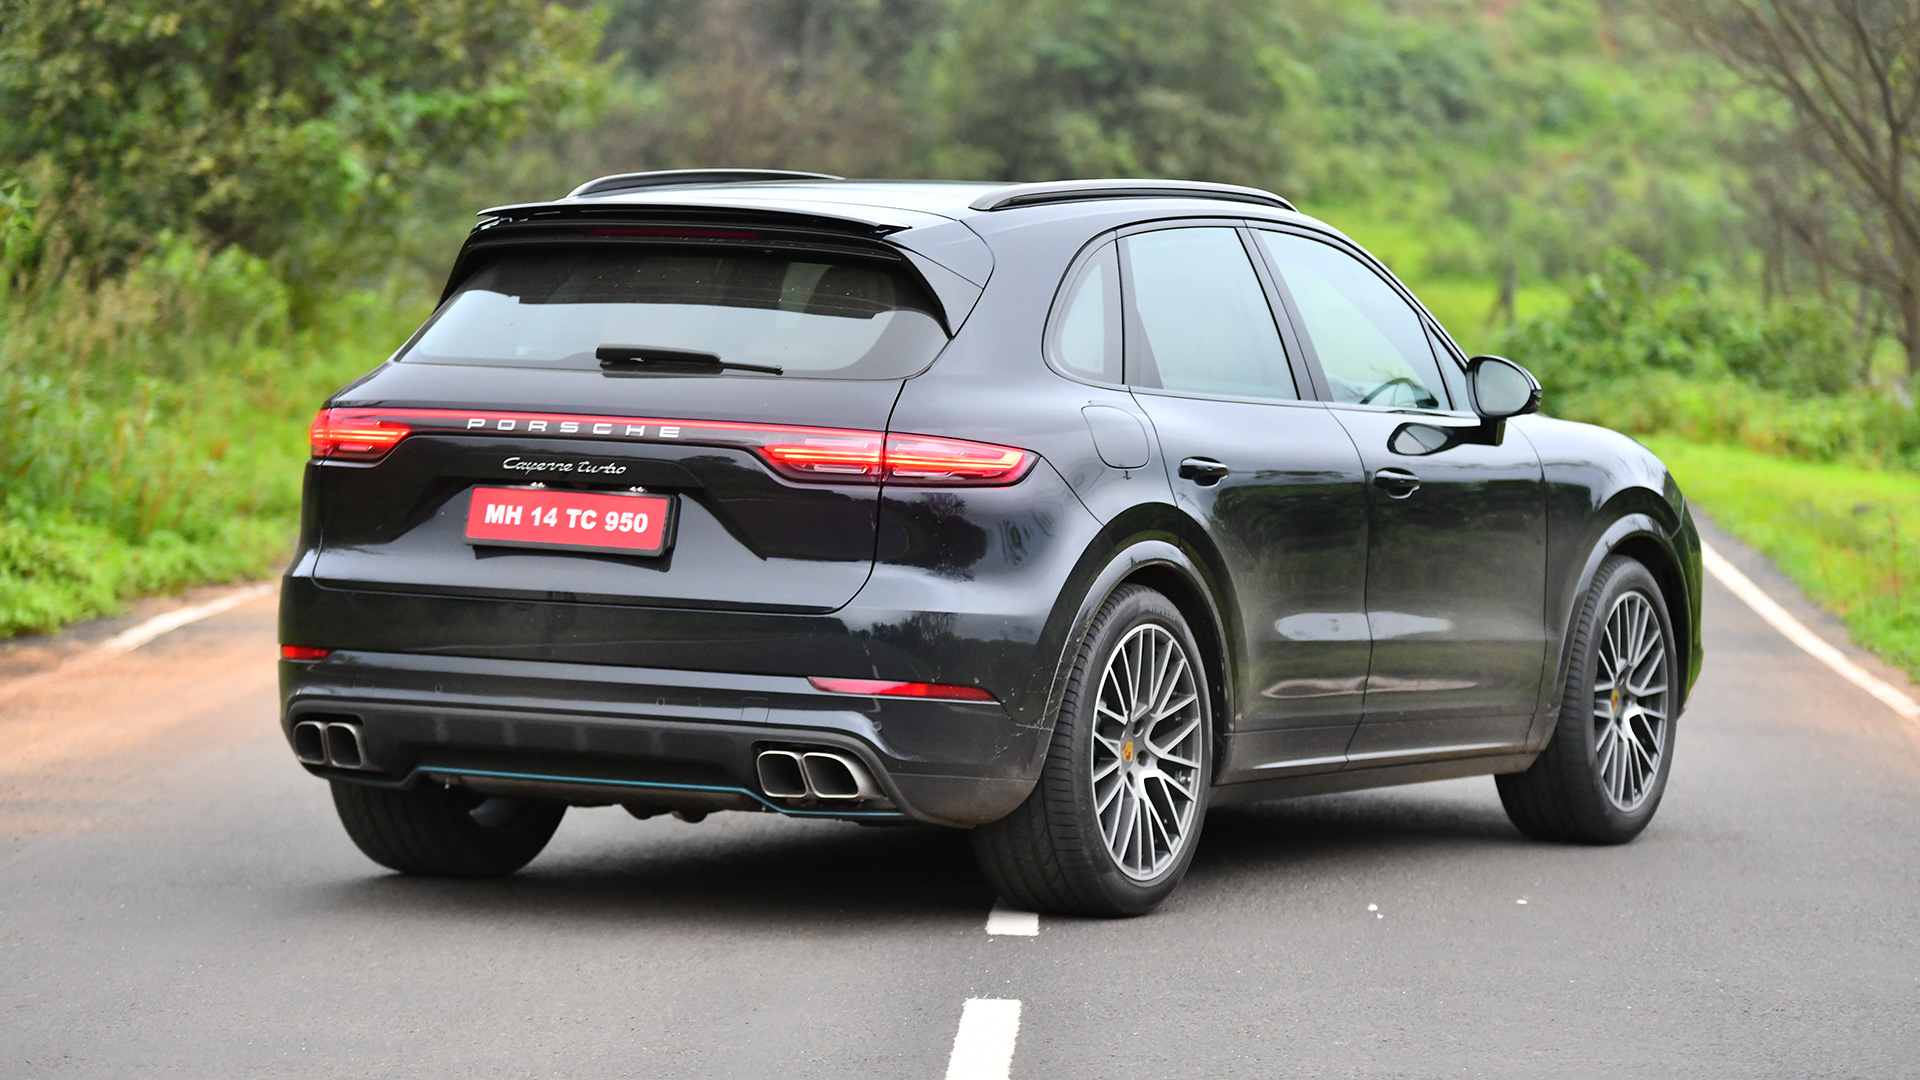 Porsche Cayenne Price In India How do you Price a Switches?